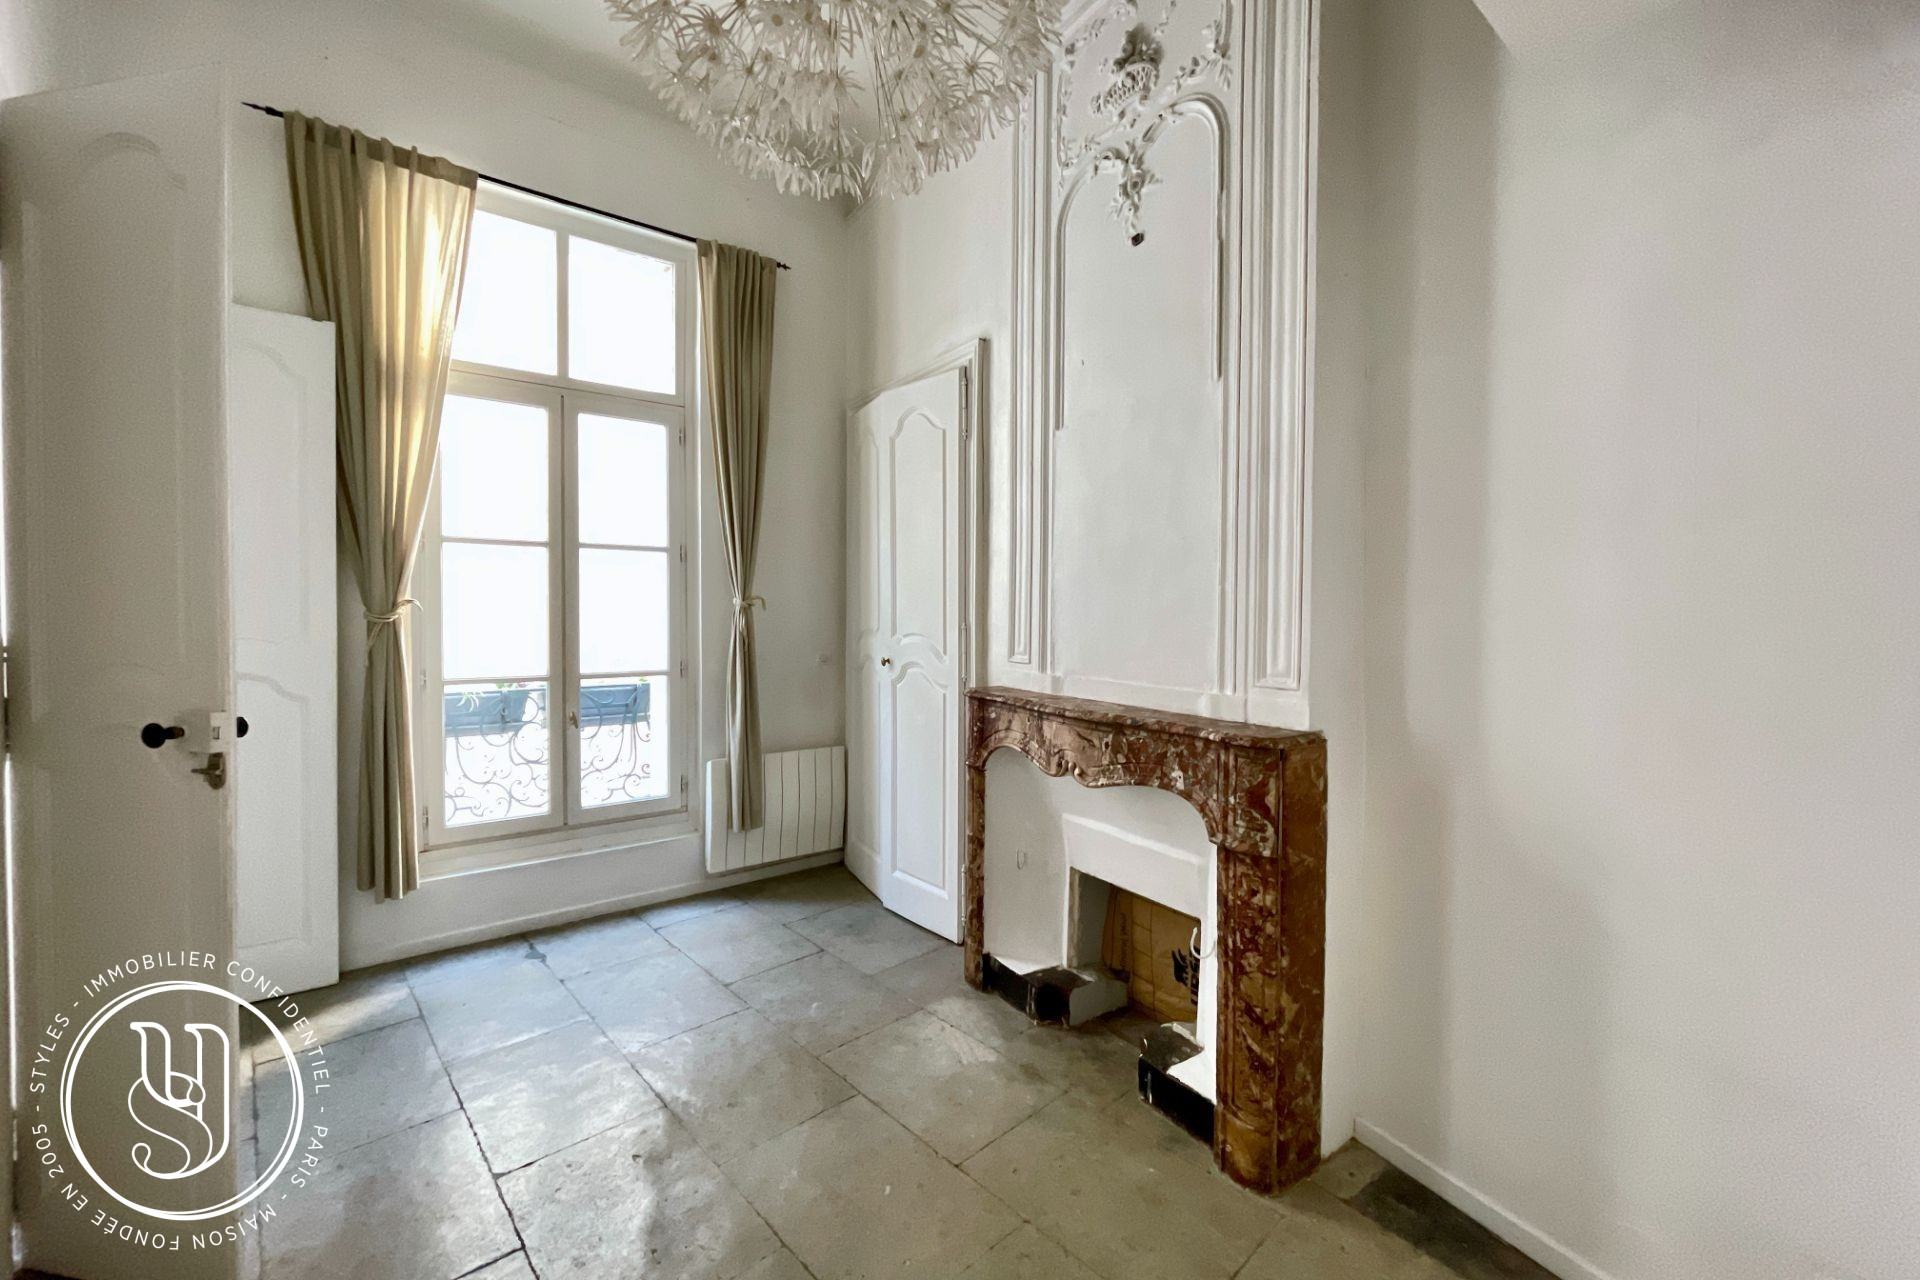 Montpellier - sold by STYLES, historcial centre, superb apartment with chara - image 6